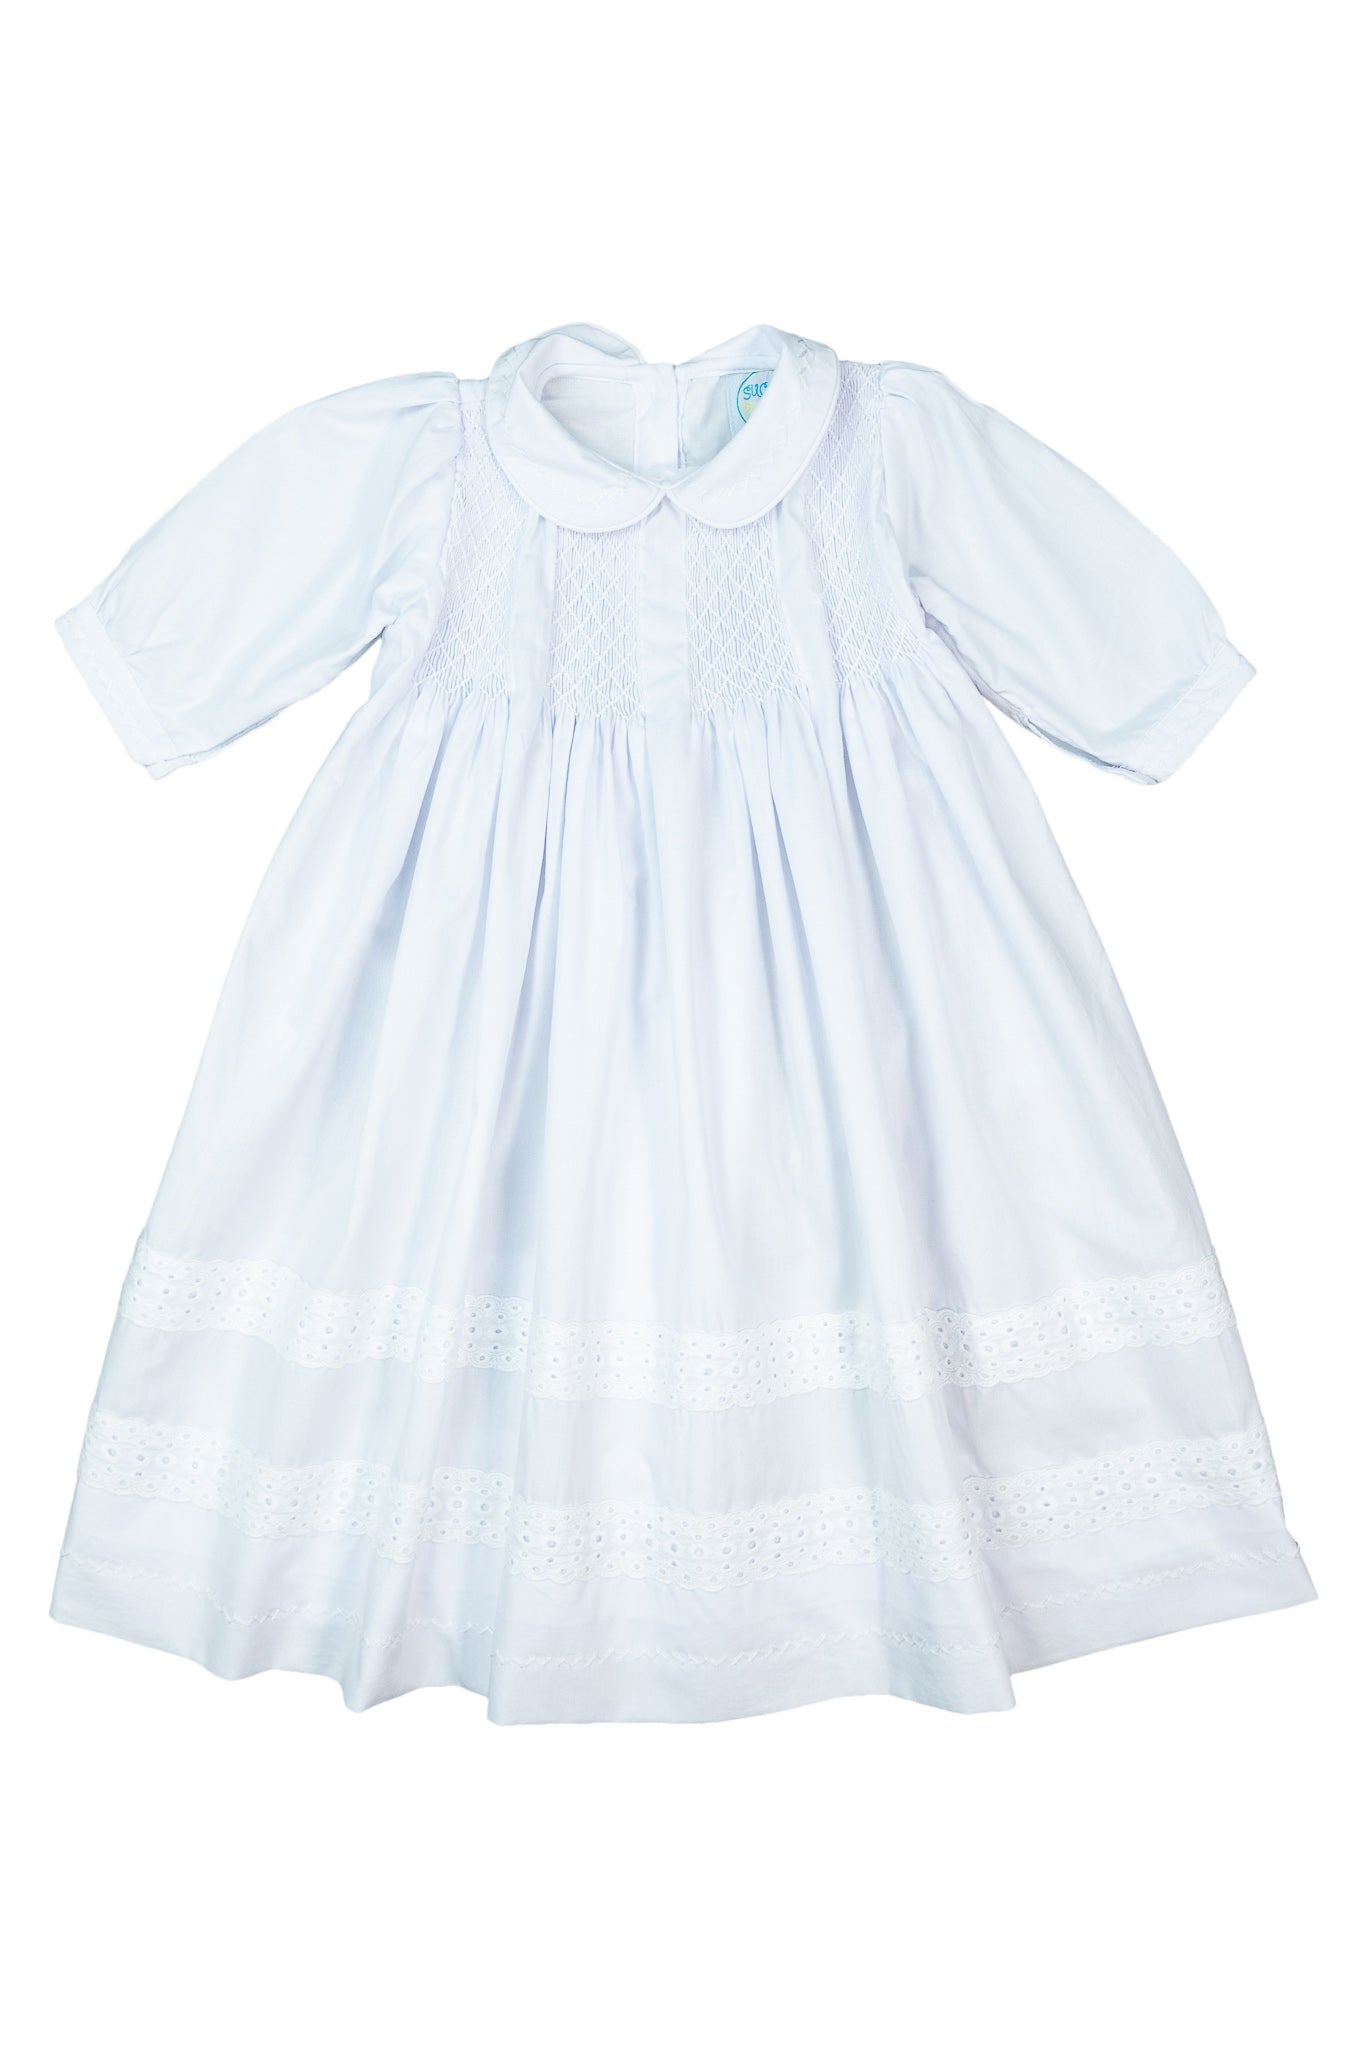 Unisex Smocked Gown